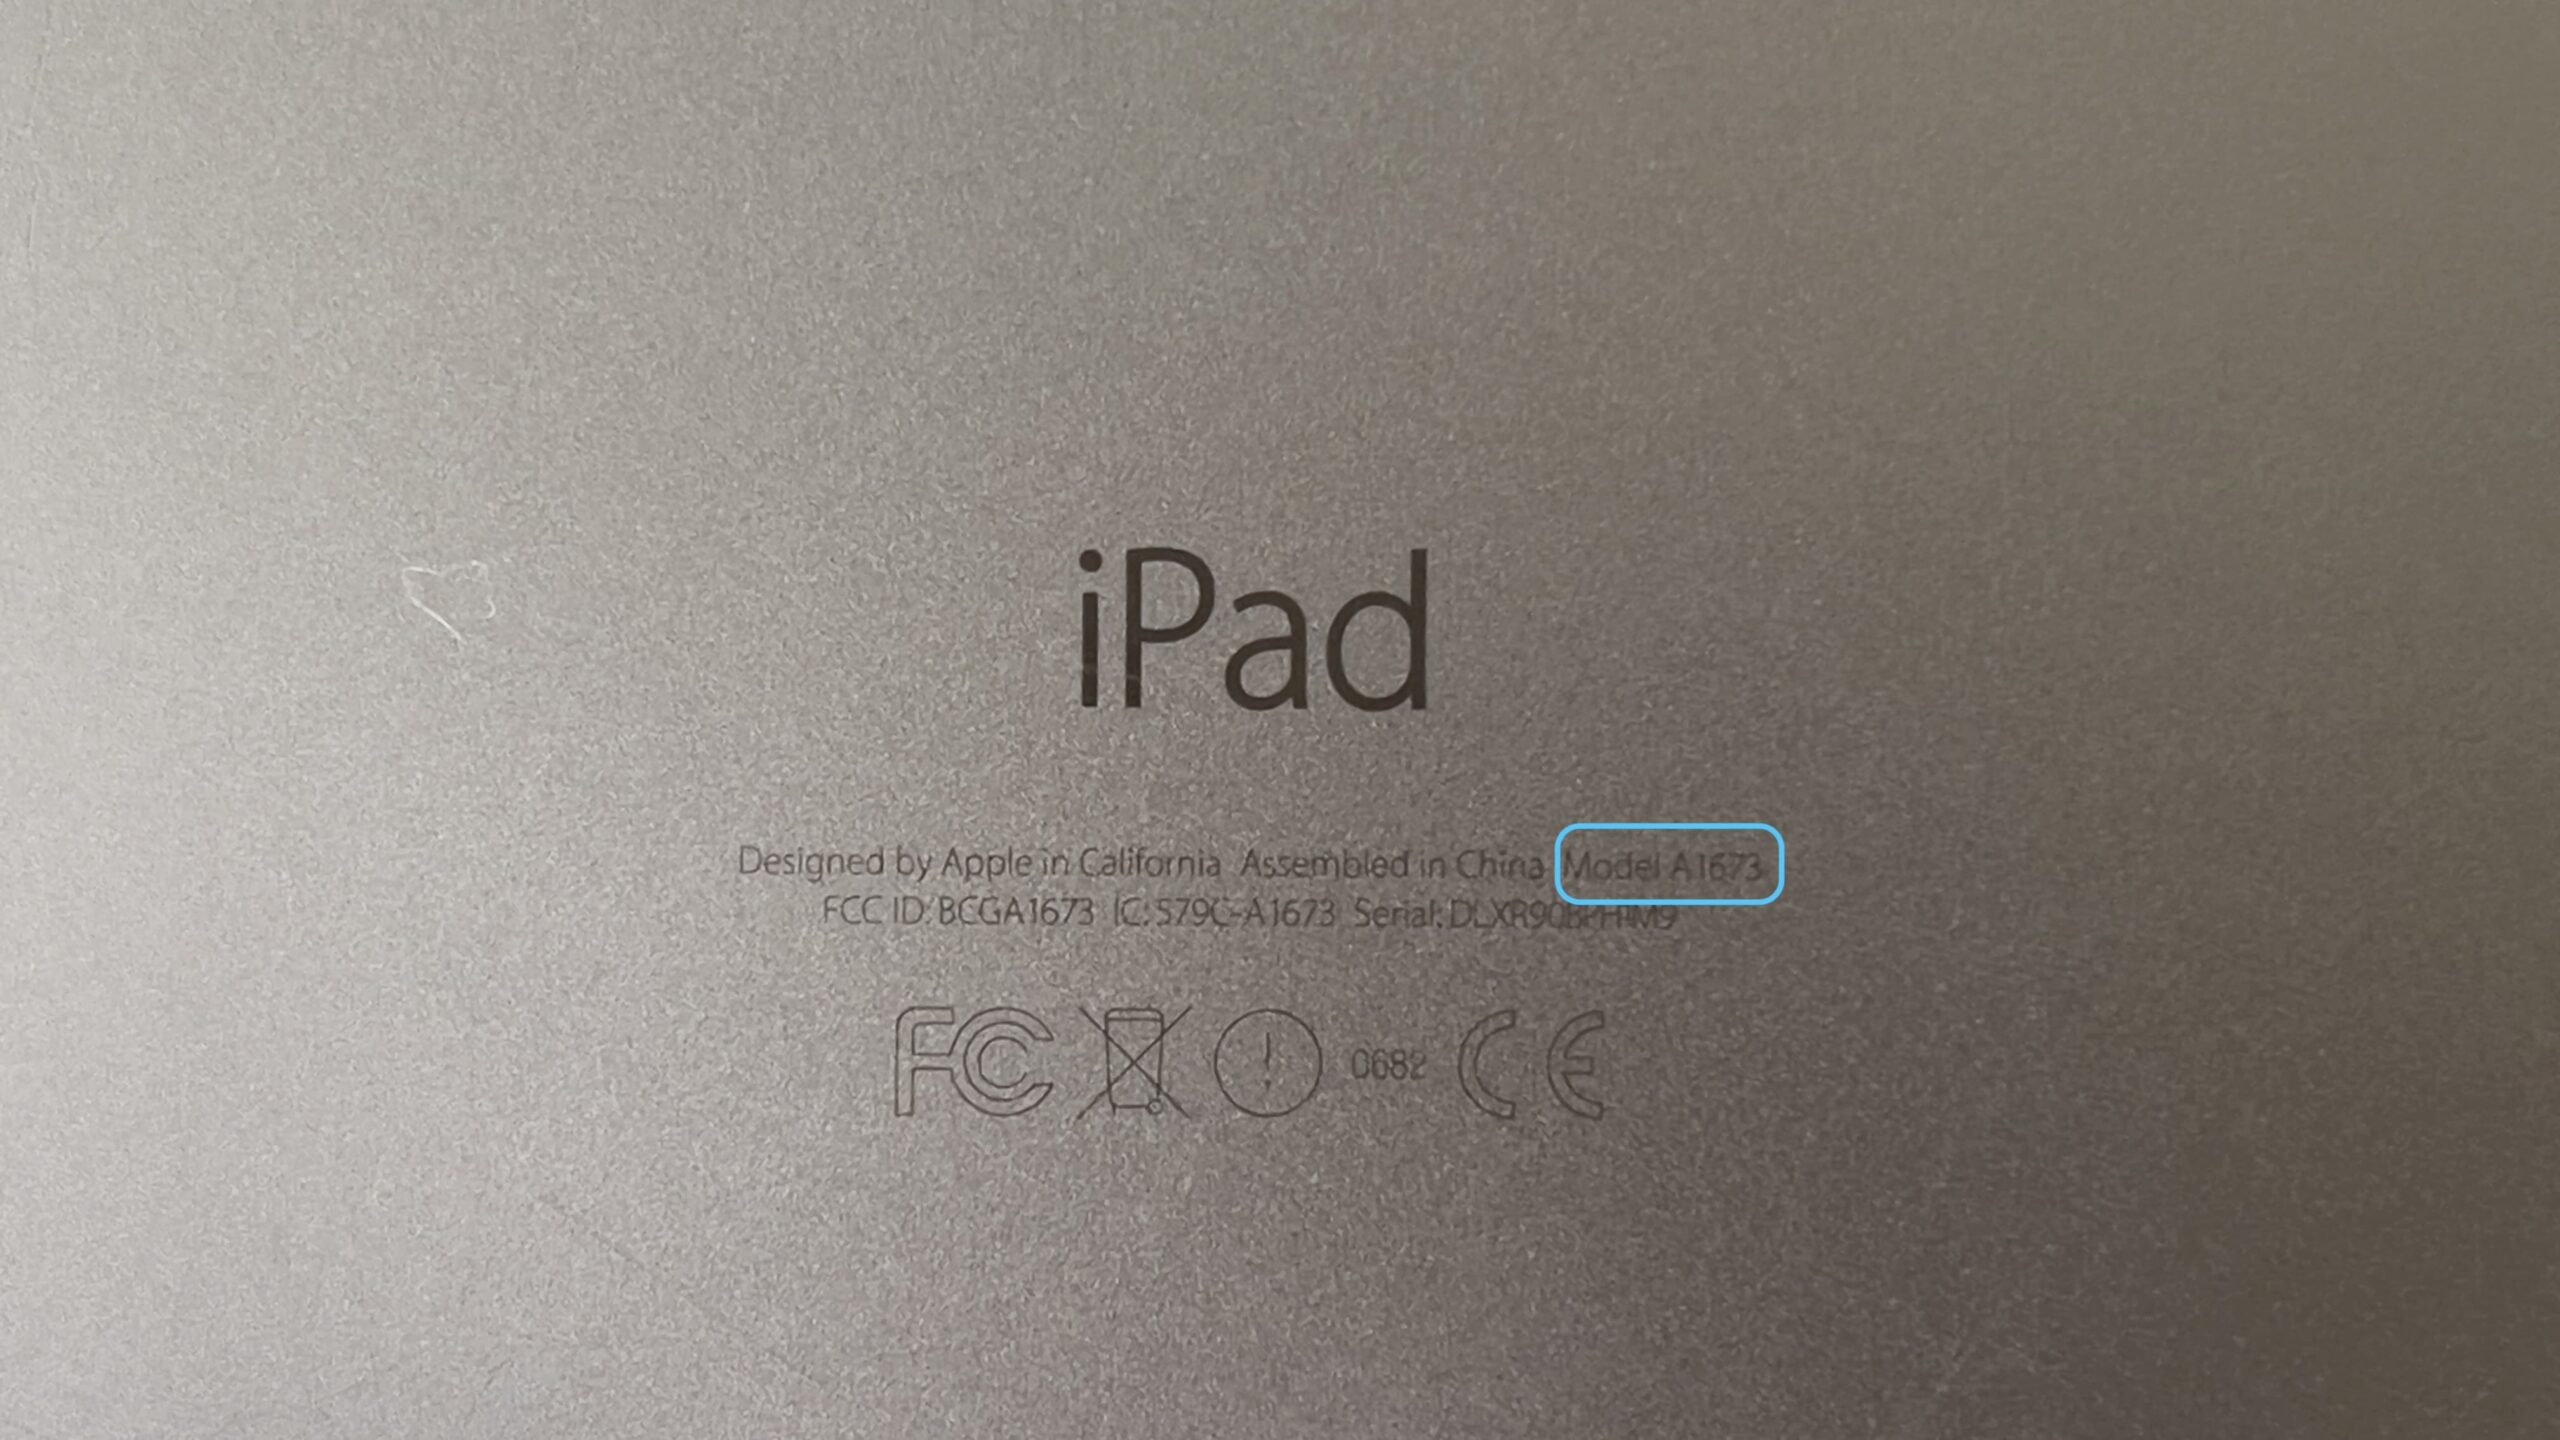 iPad Model Number Highlighted